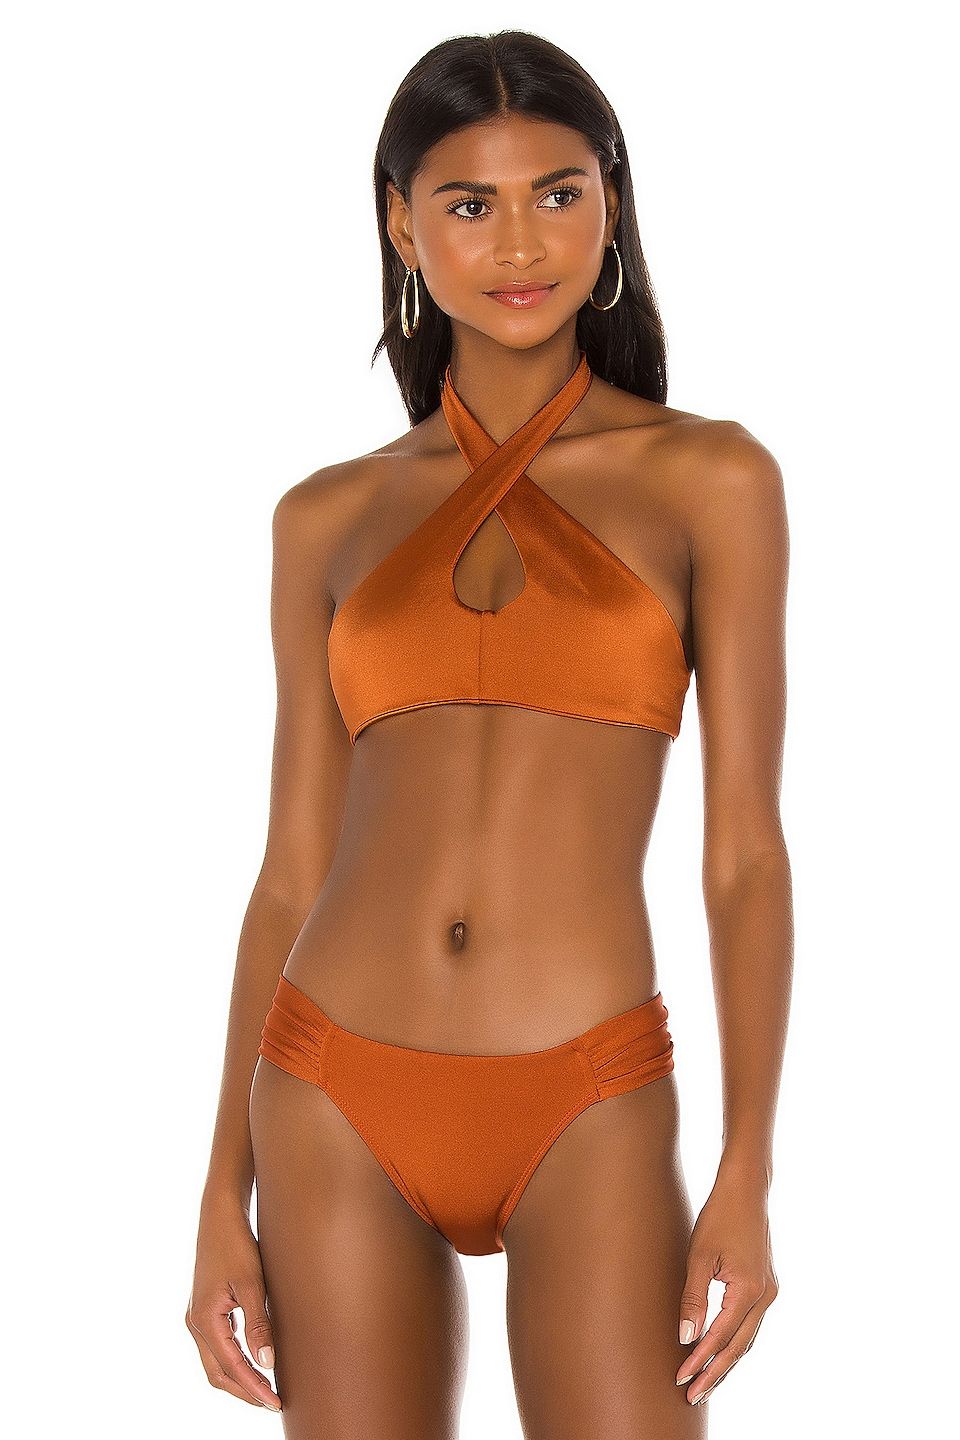 The Best Bikini Tops for Small Busts